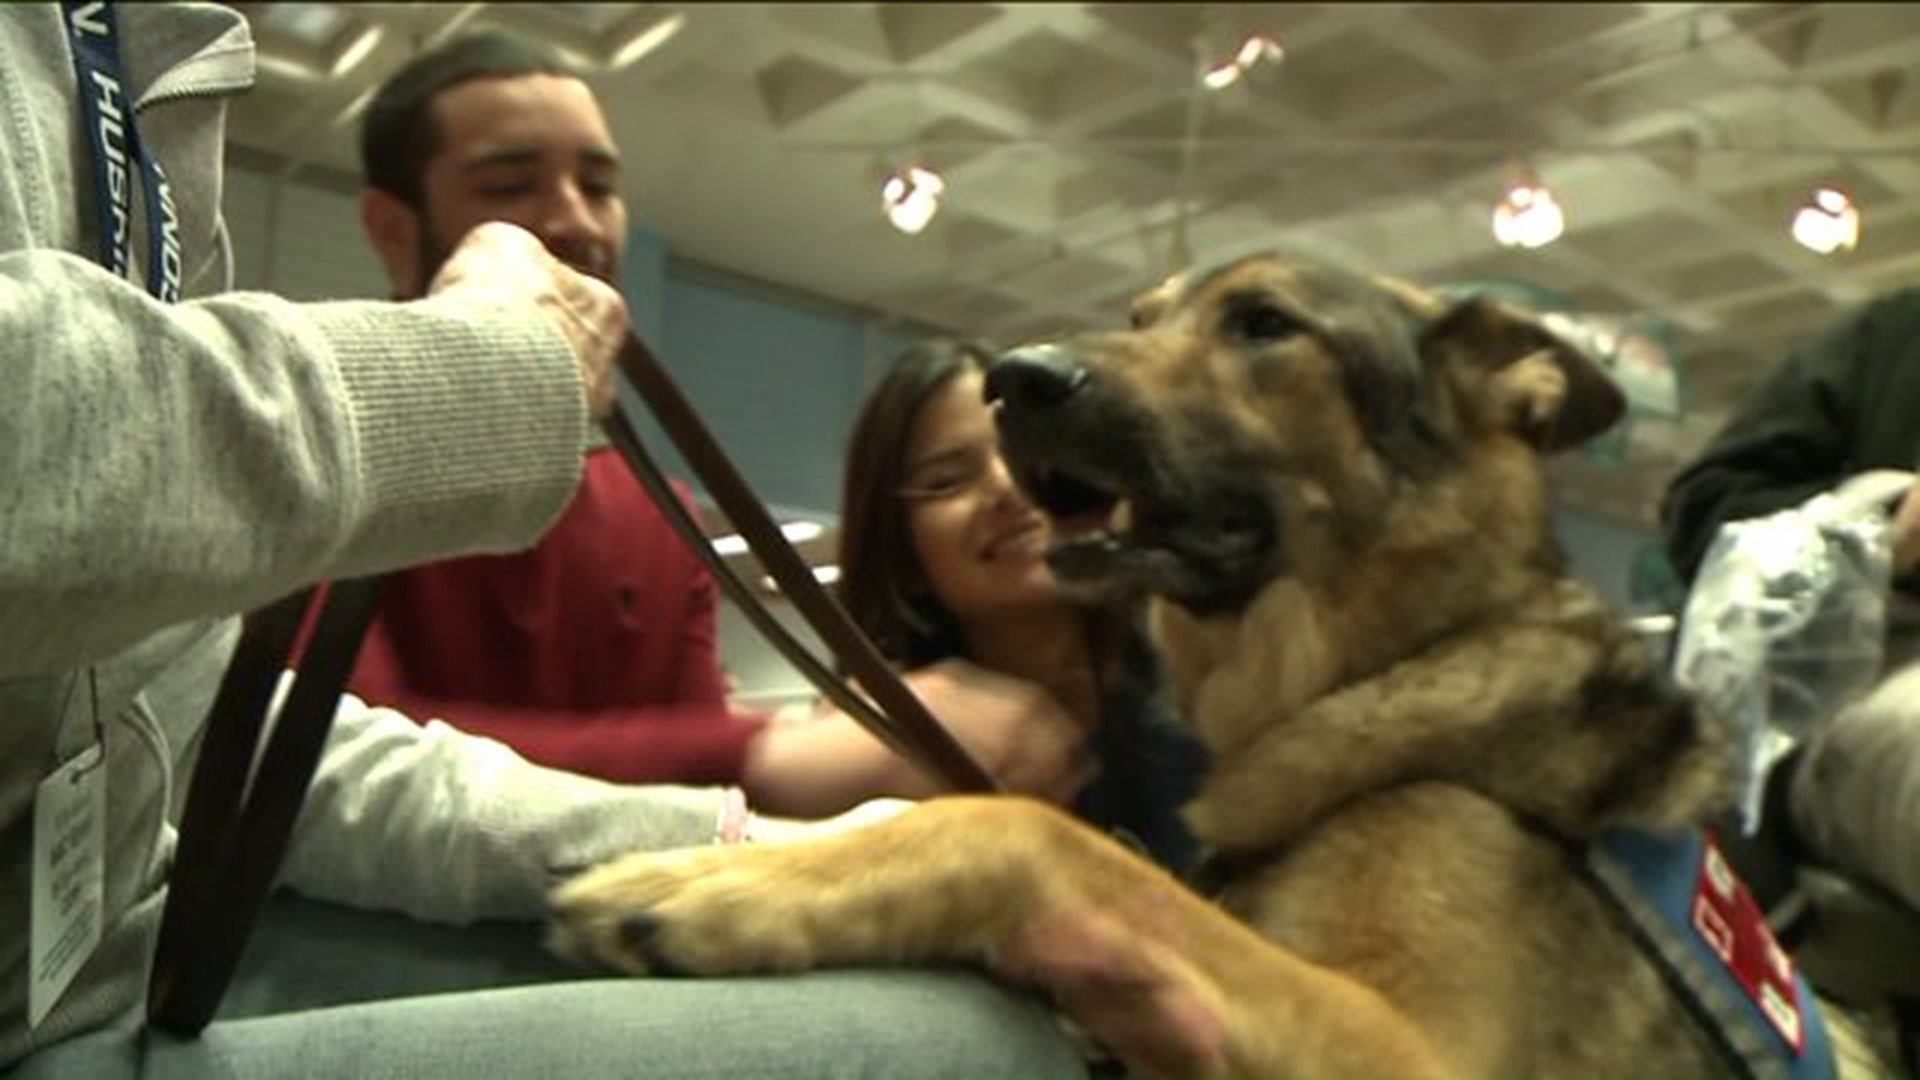 Therapy dogs help UConn students de-stress before finals